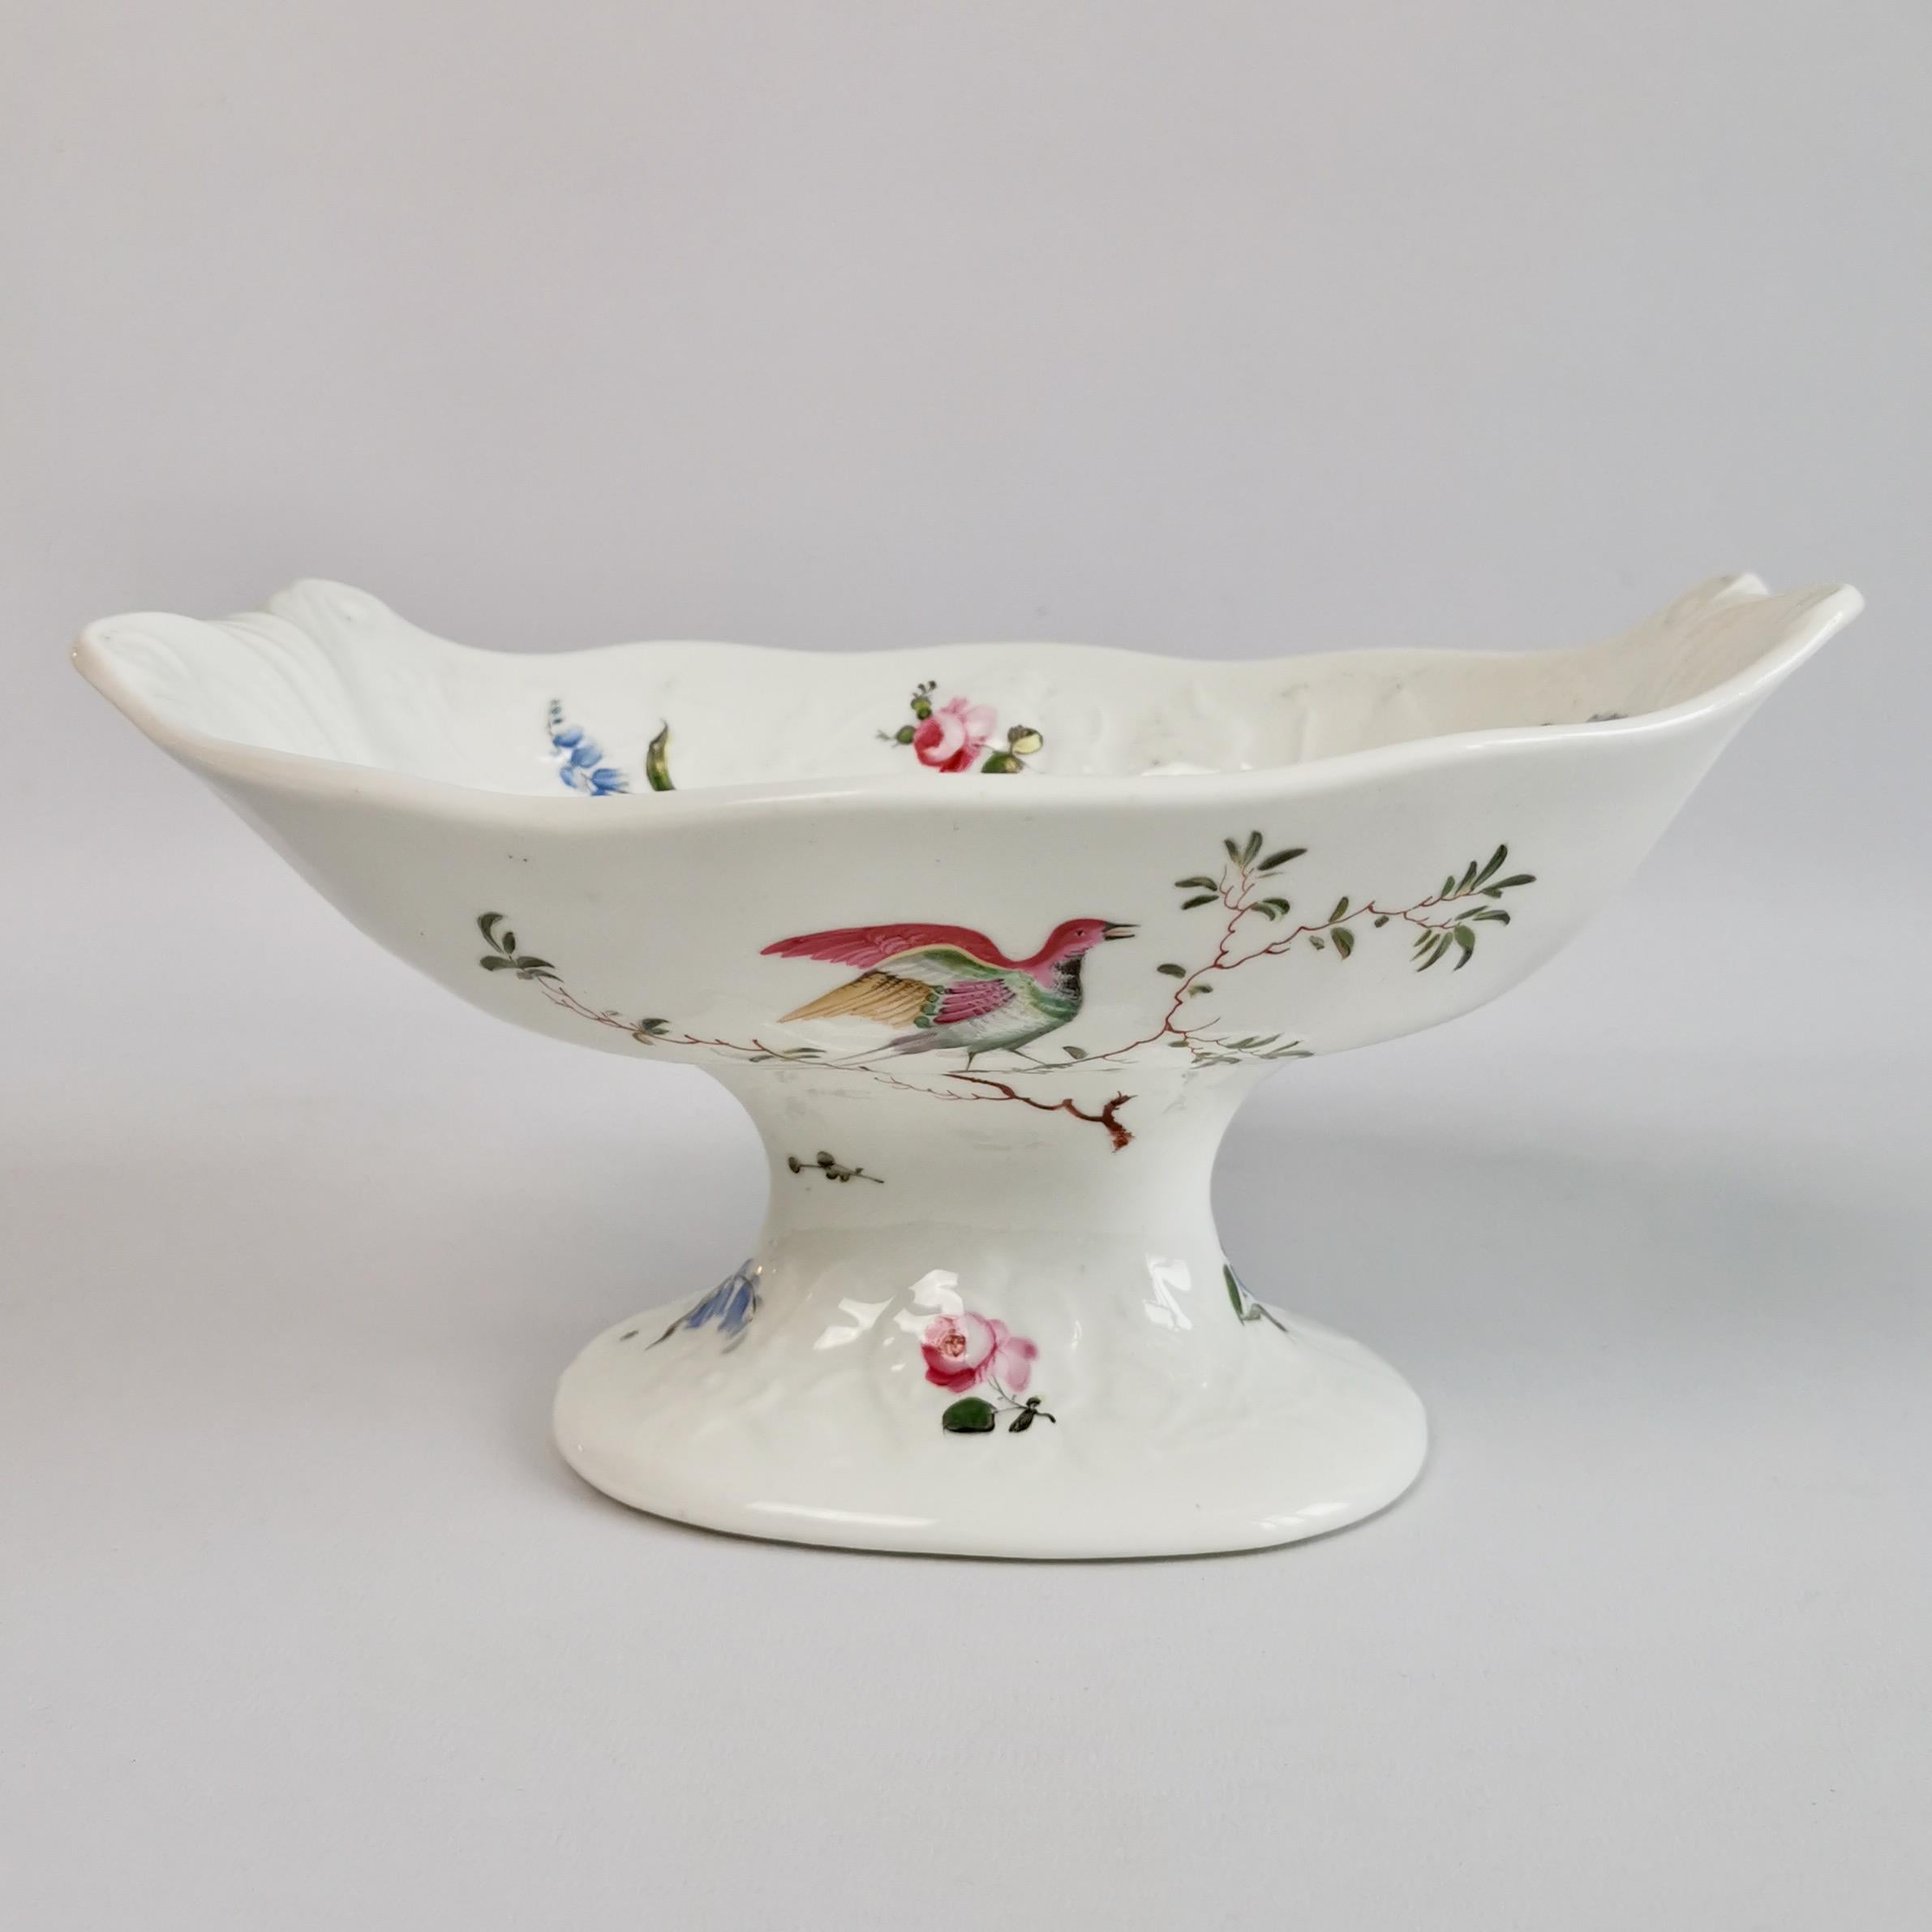 This is a stunning comport or centre piece made by Mayer & Newbold in about 1820. The comport is white and blind-moulded with beautiful hand painted exotic birds.
 
This comport would have formed the central serving piece to a large dessert